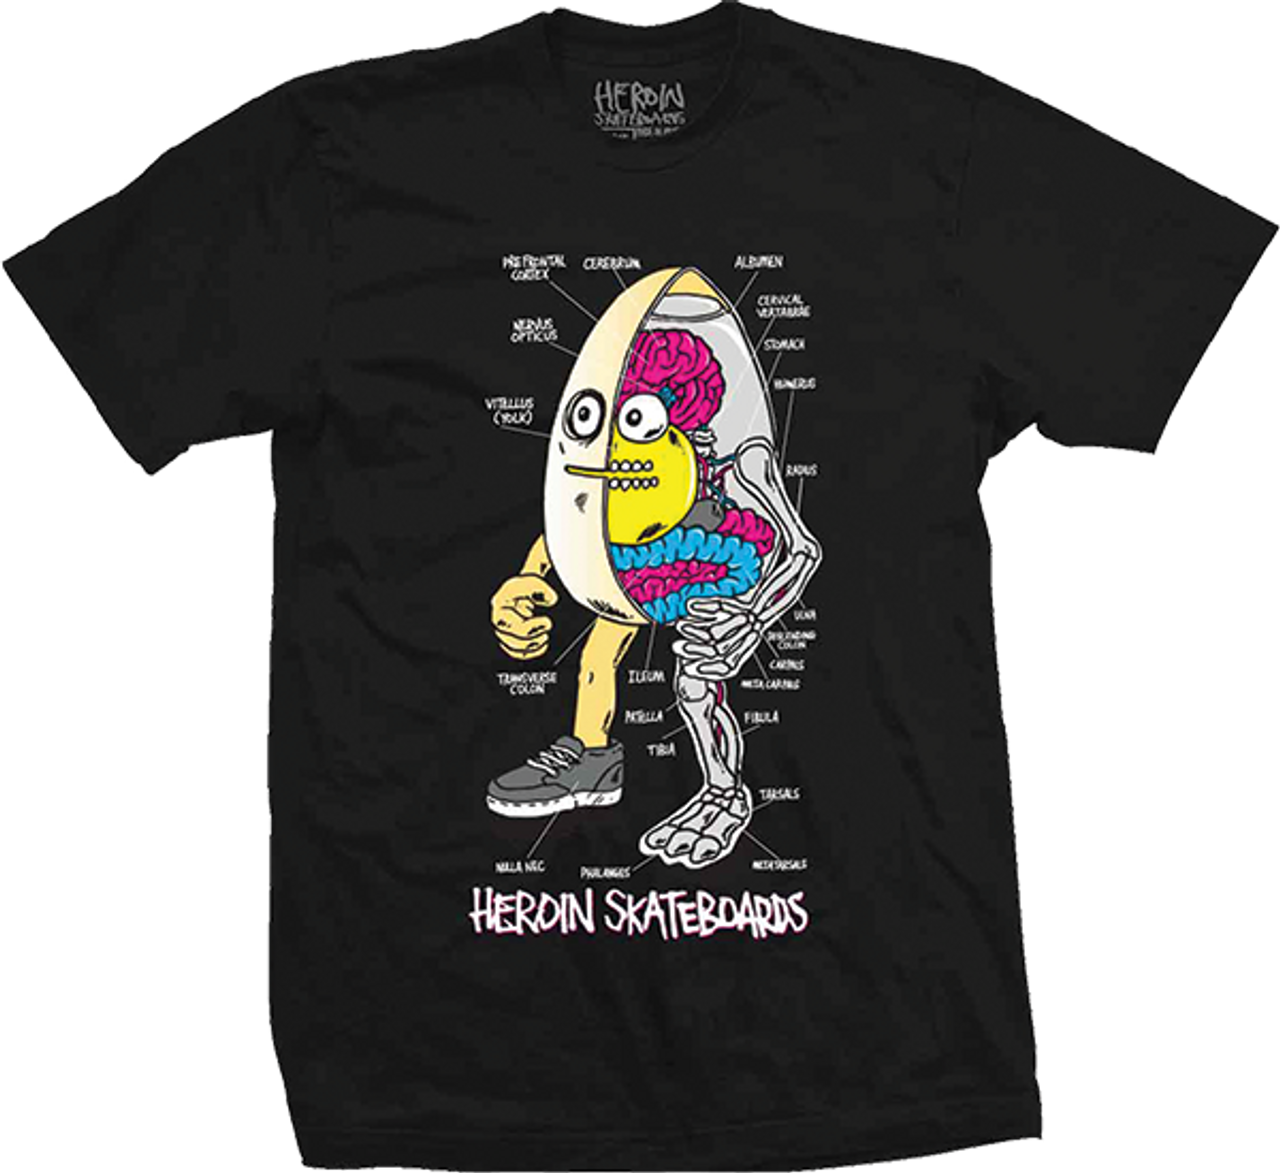 HEROIN ANATOMY OF AN EGG SS TSHIRT LARGE-BLK